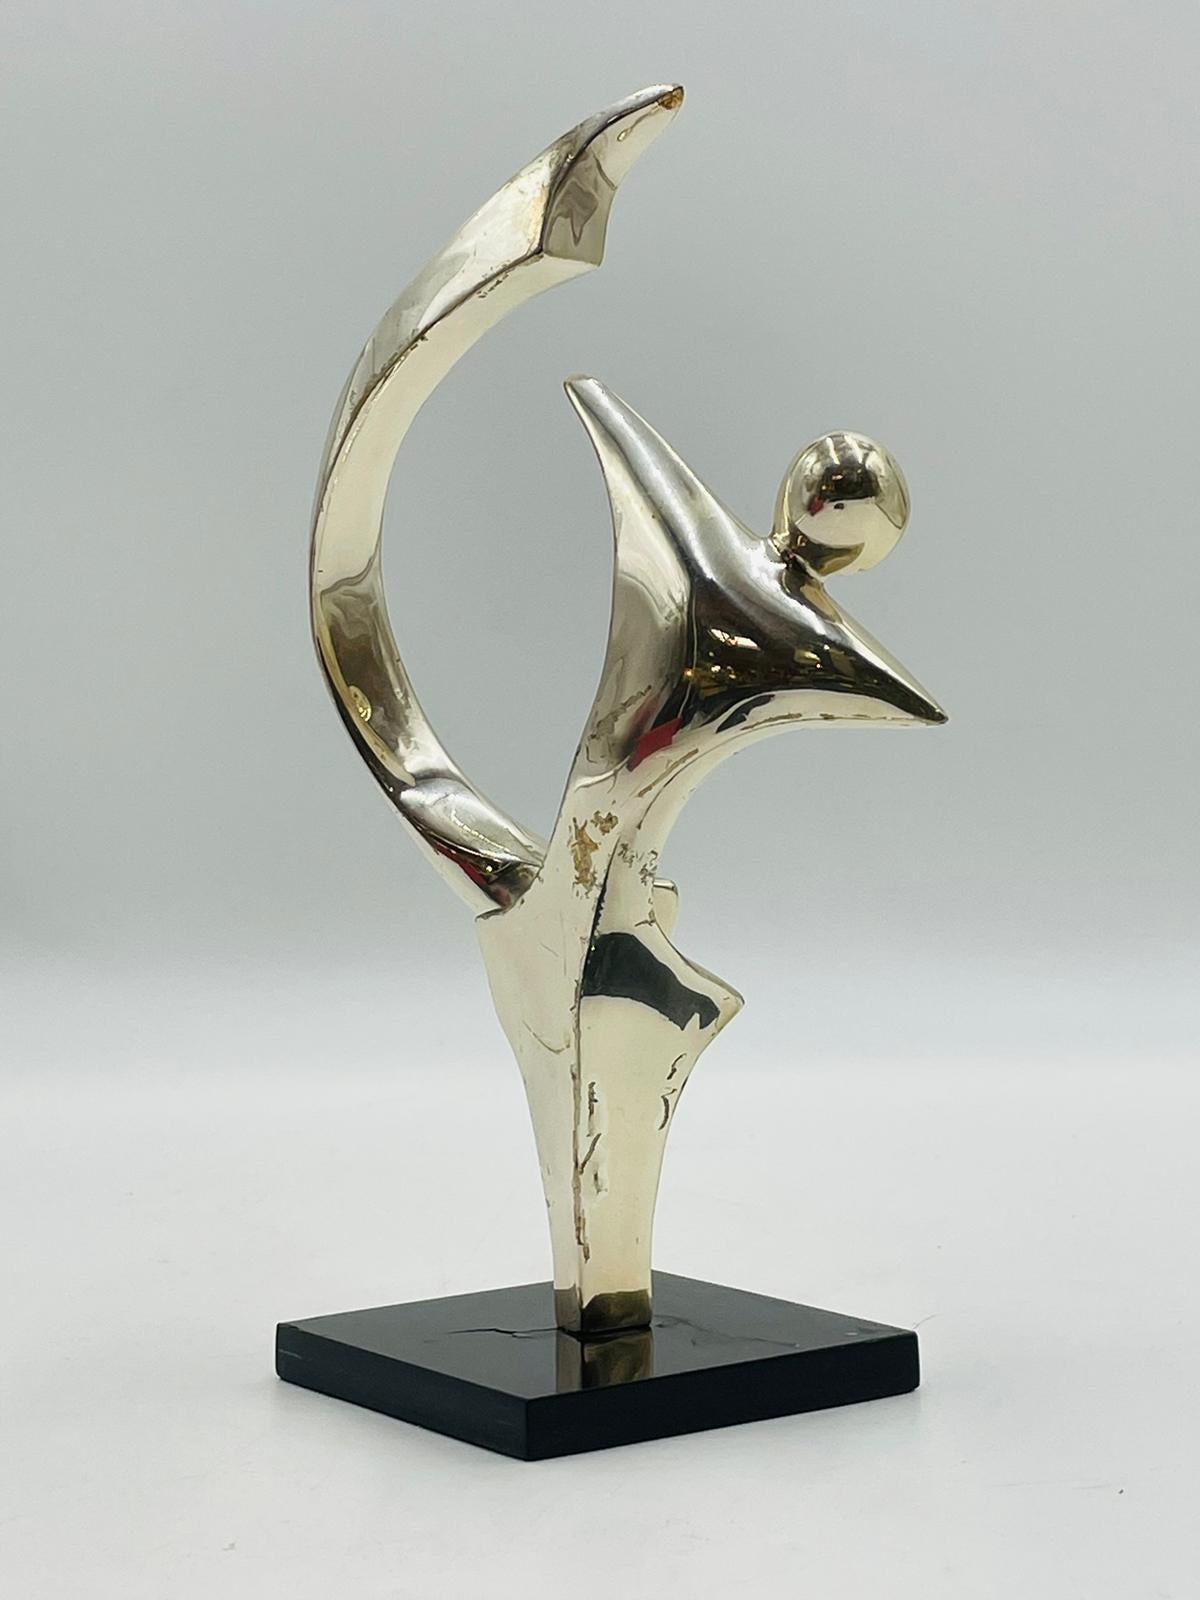 Canadian Nickel Plated Bronze Sculpture by Kieff Grediaga #4/10 Signed For Sale